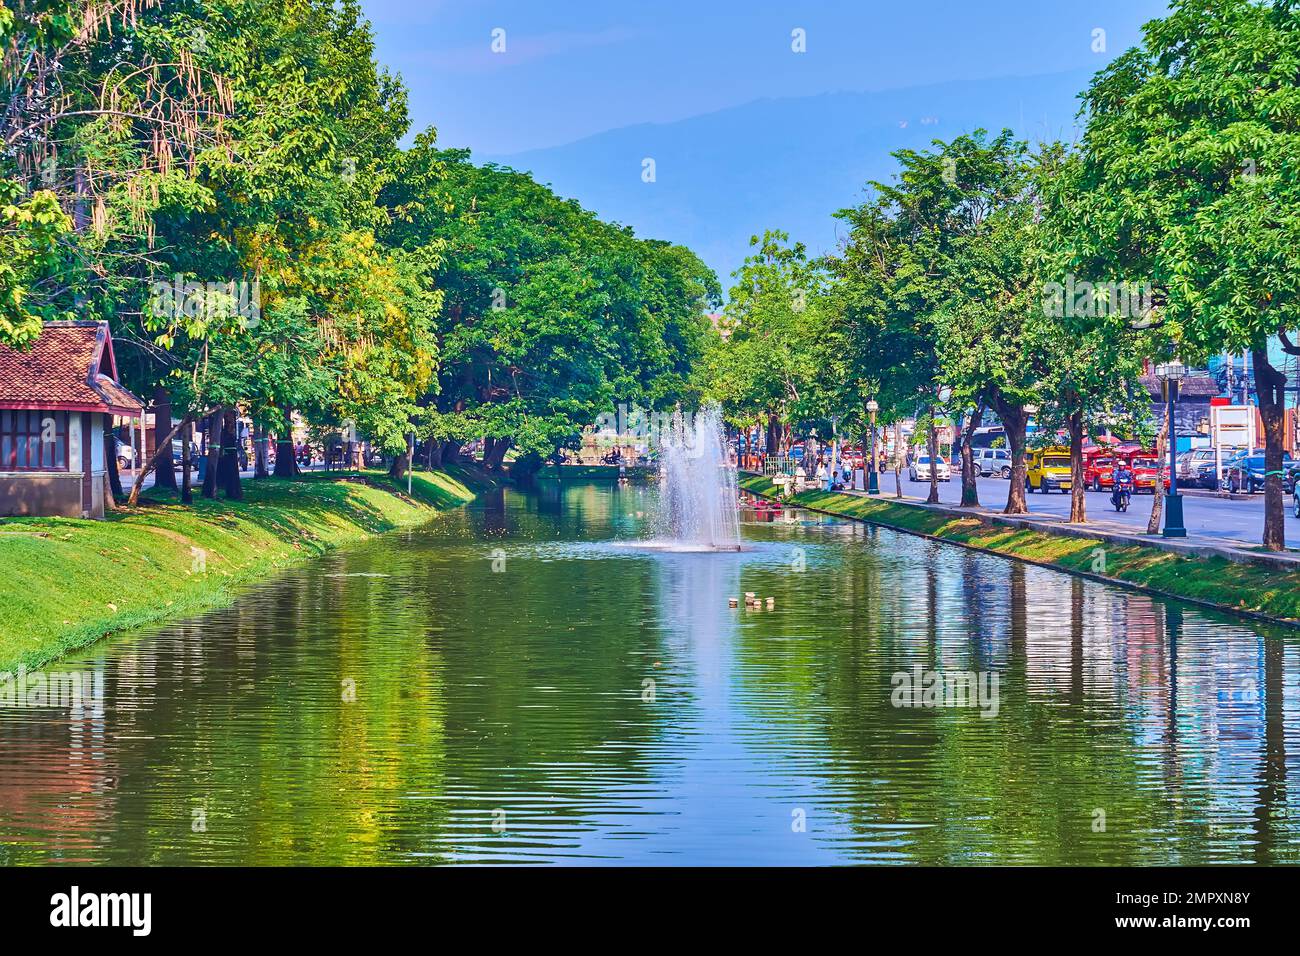 The Old City Moat with fountains and lush green park, reflected on water surface, Chiang Mai, Thailand Stock Photo